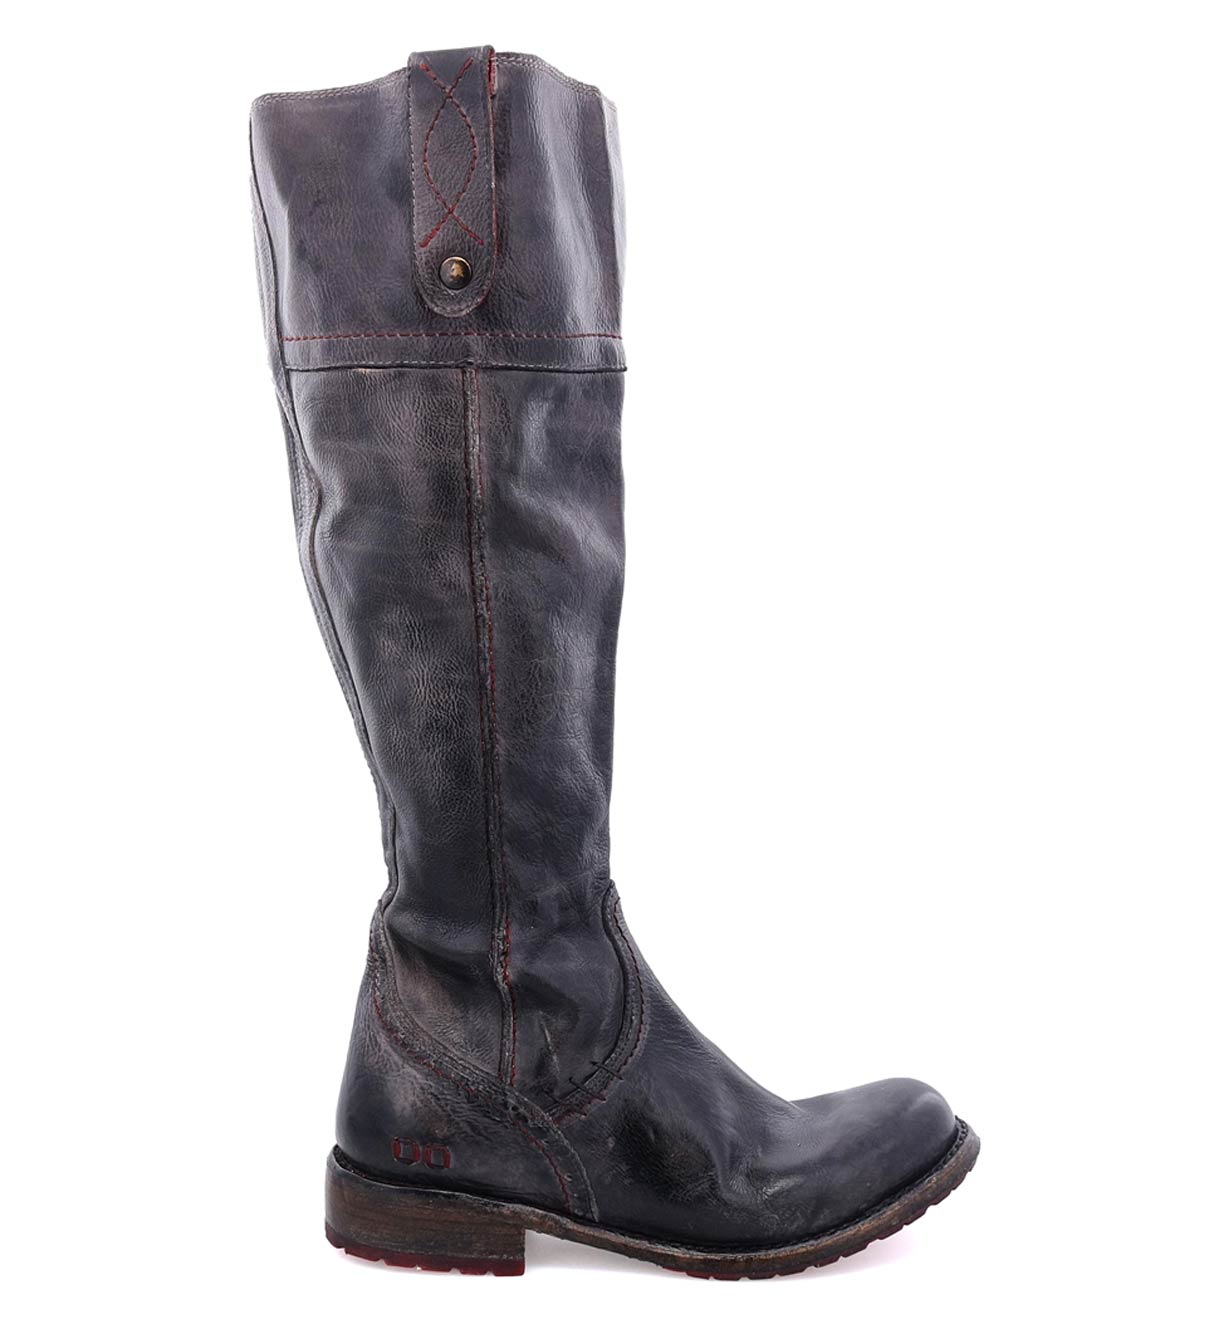 A pair of Bed Stu Jacqueline Wide Calf boots with a zipper on the side.